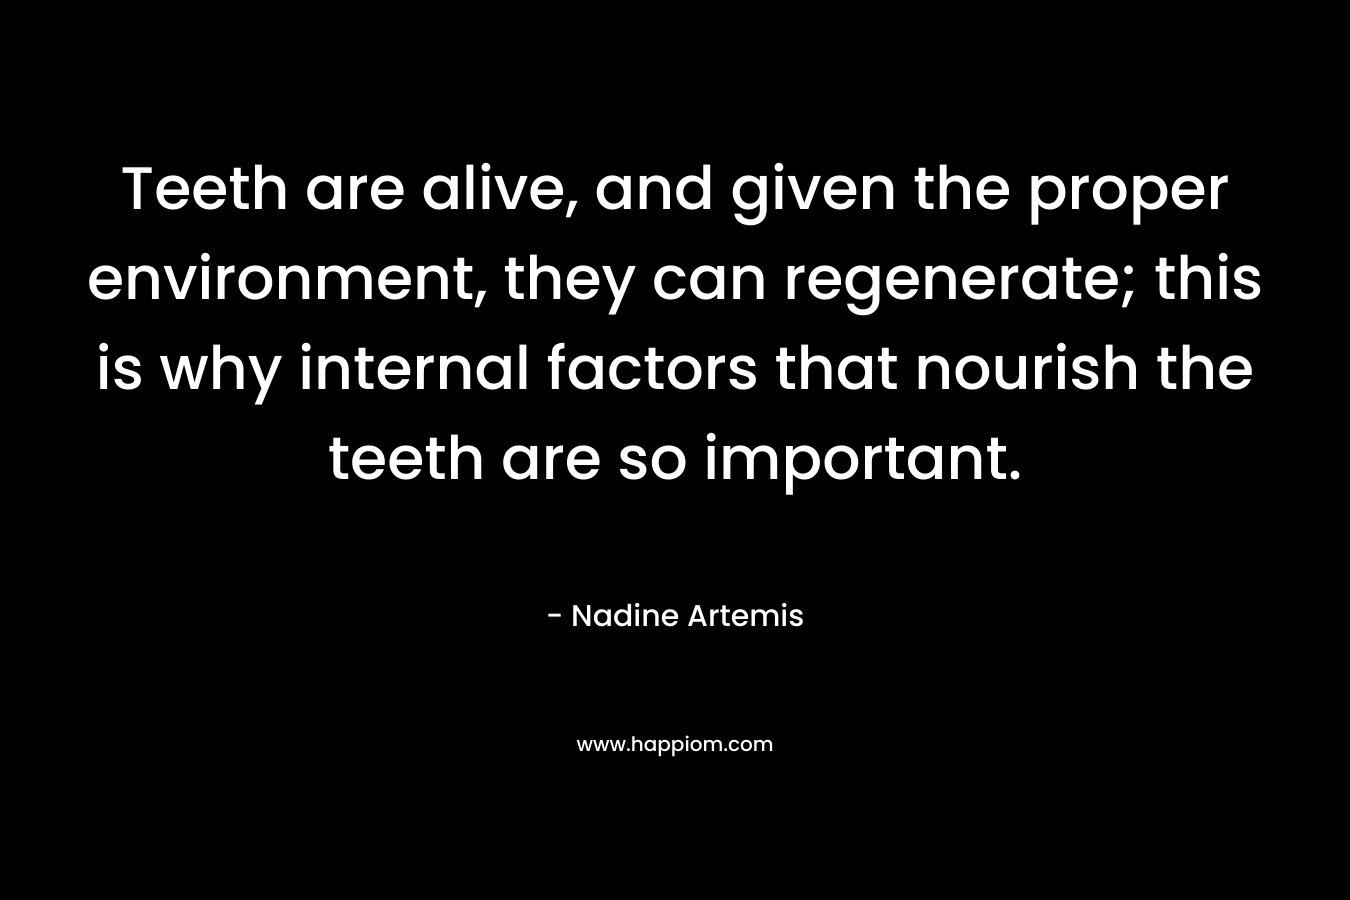 Teeth are alive, and given the proper environment, they can regenerate; this is why internal factors that nourish the teeth are so important.